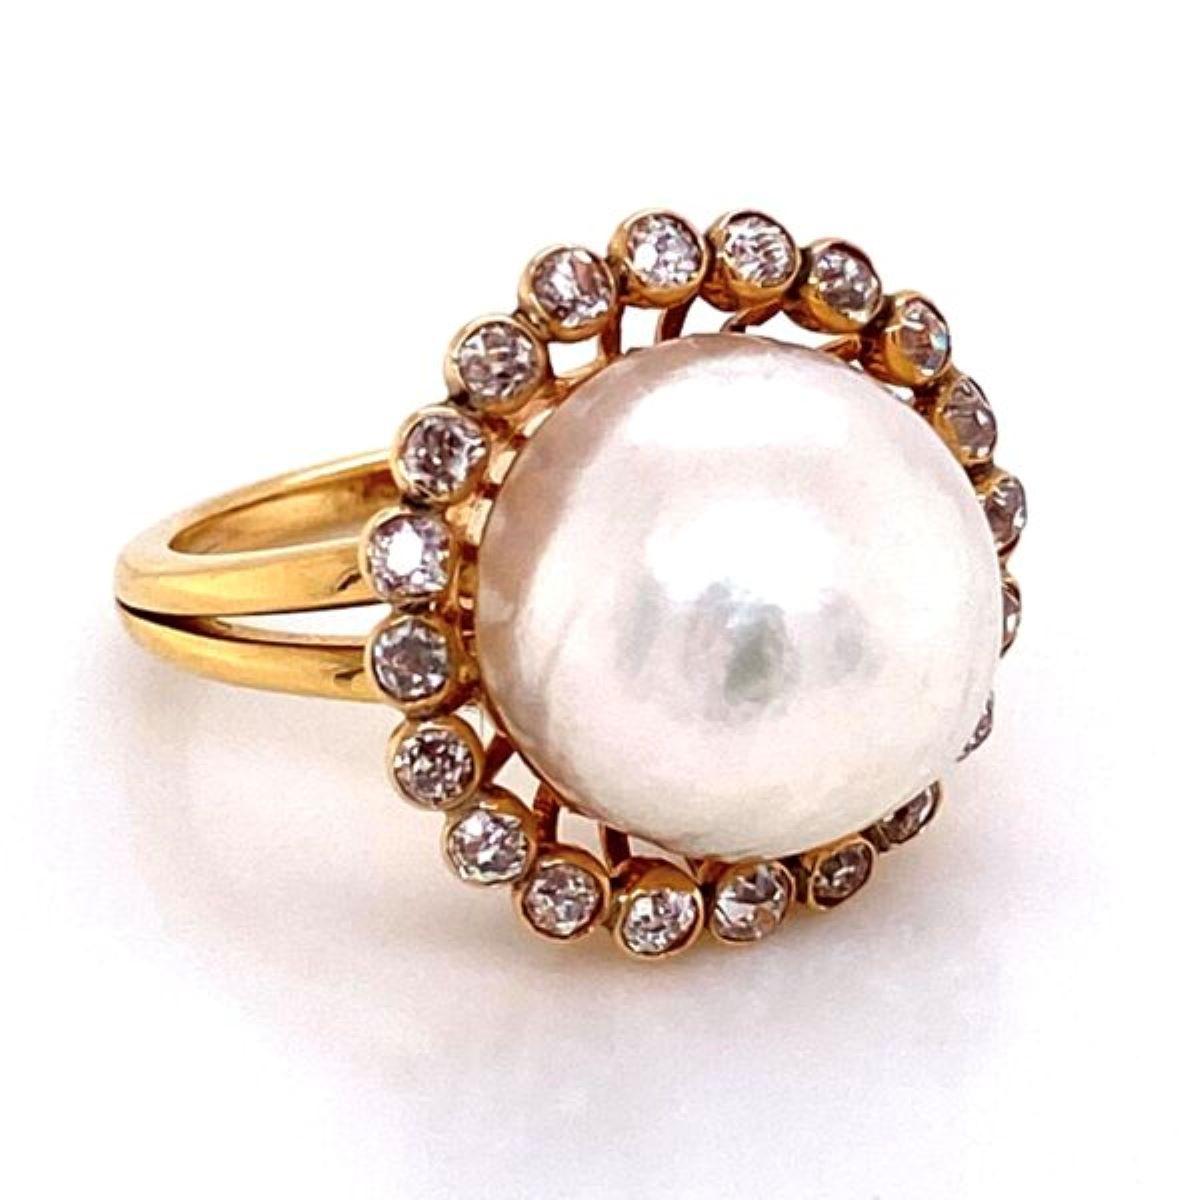 Women's Pearl and Old European Diamond Victorian Gold Ring Estate Fine Jewelry